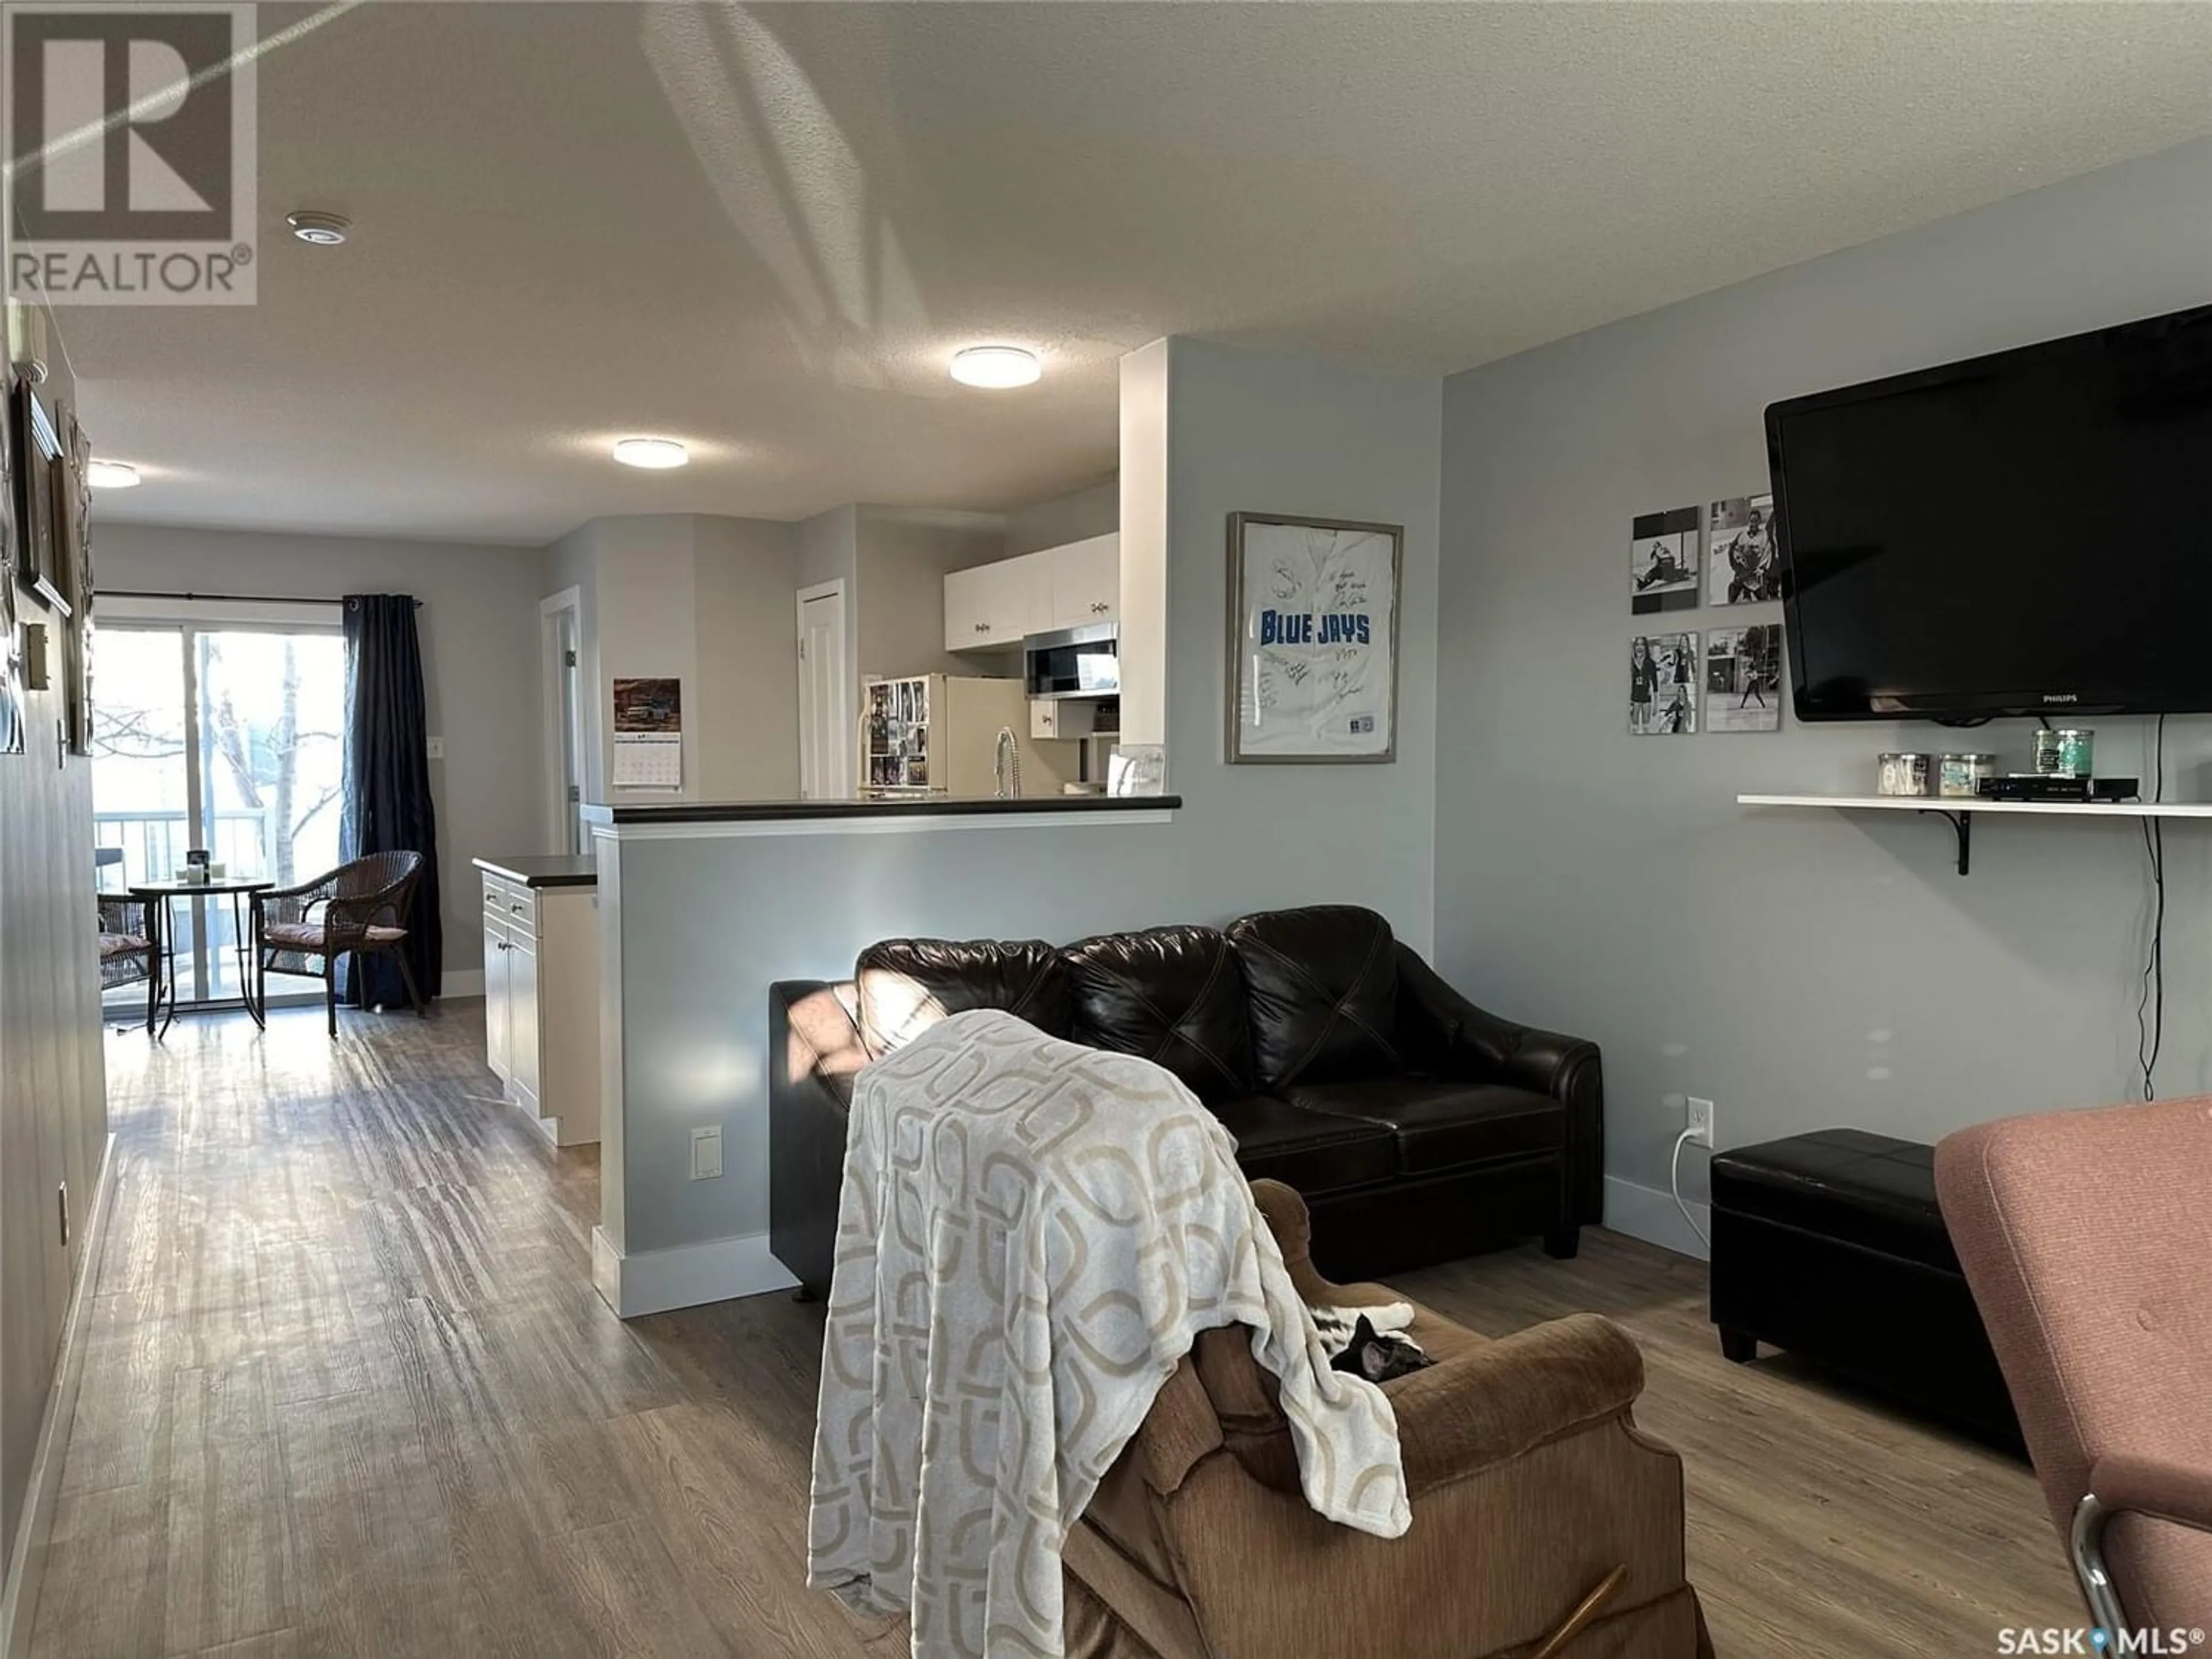 A pic of a room for 307 851 Chester ROAD, Moose Jaw Saskatchewan S6J0A4